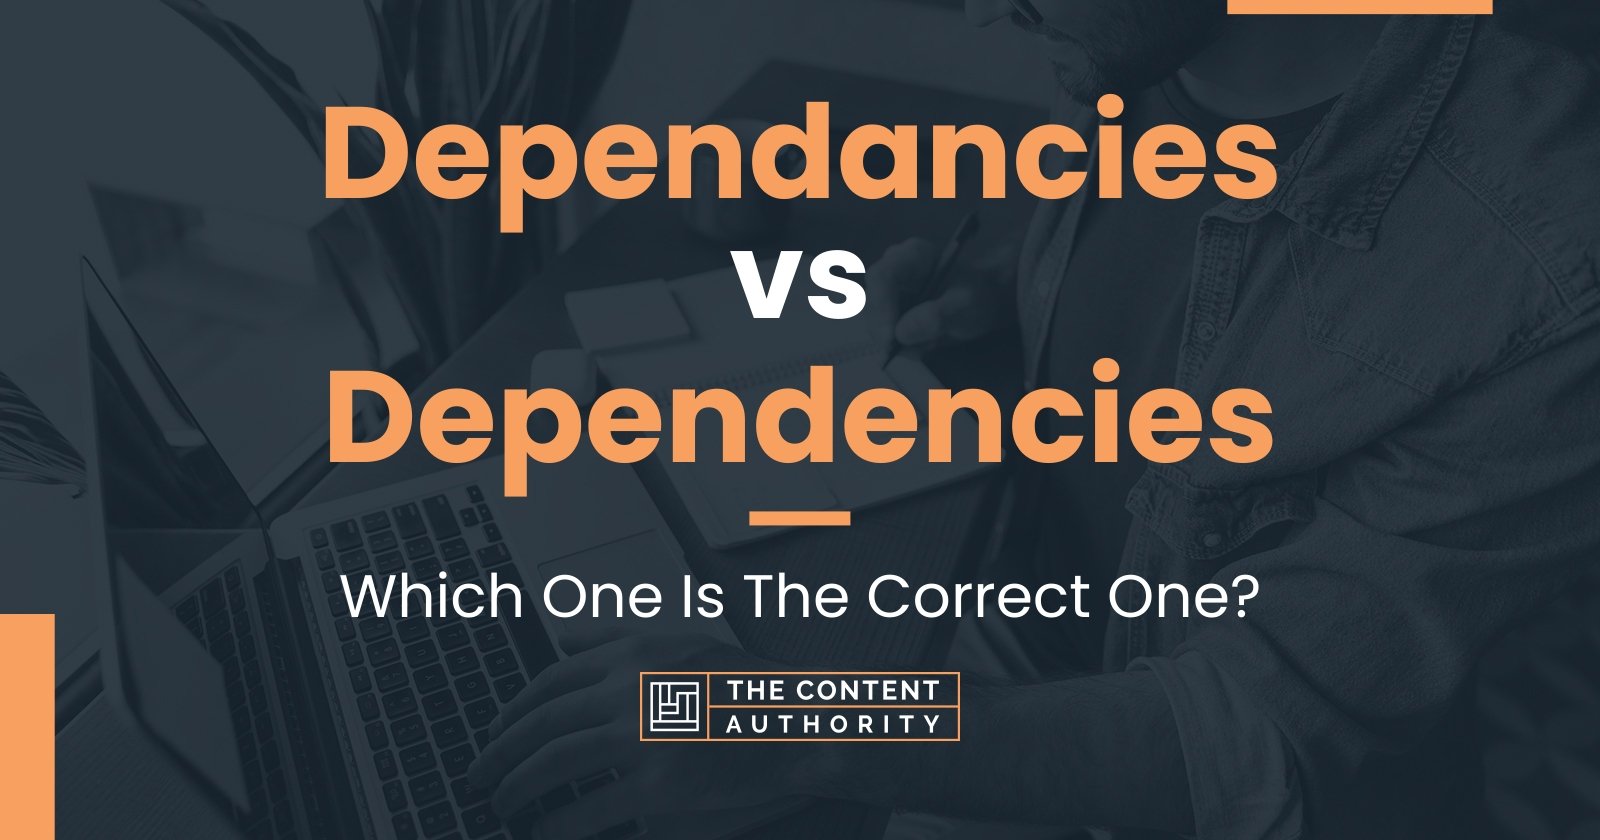 Dependancies vs Dependencies: Which One Is The Correct One?